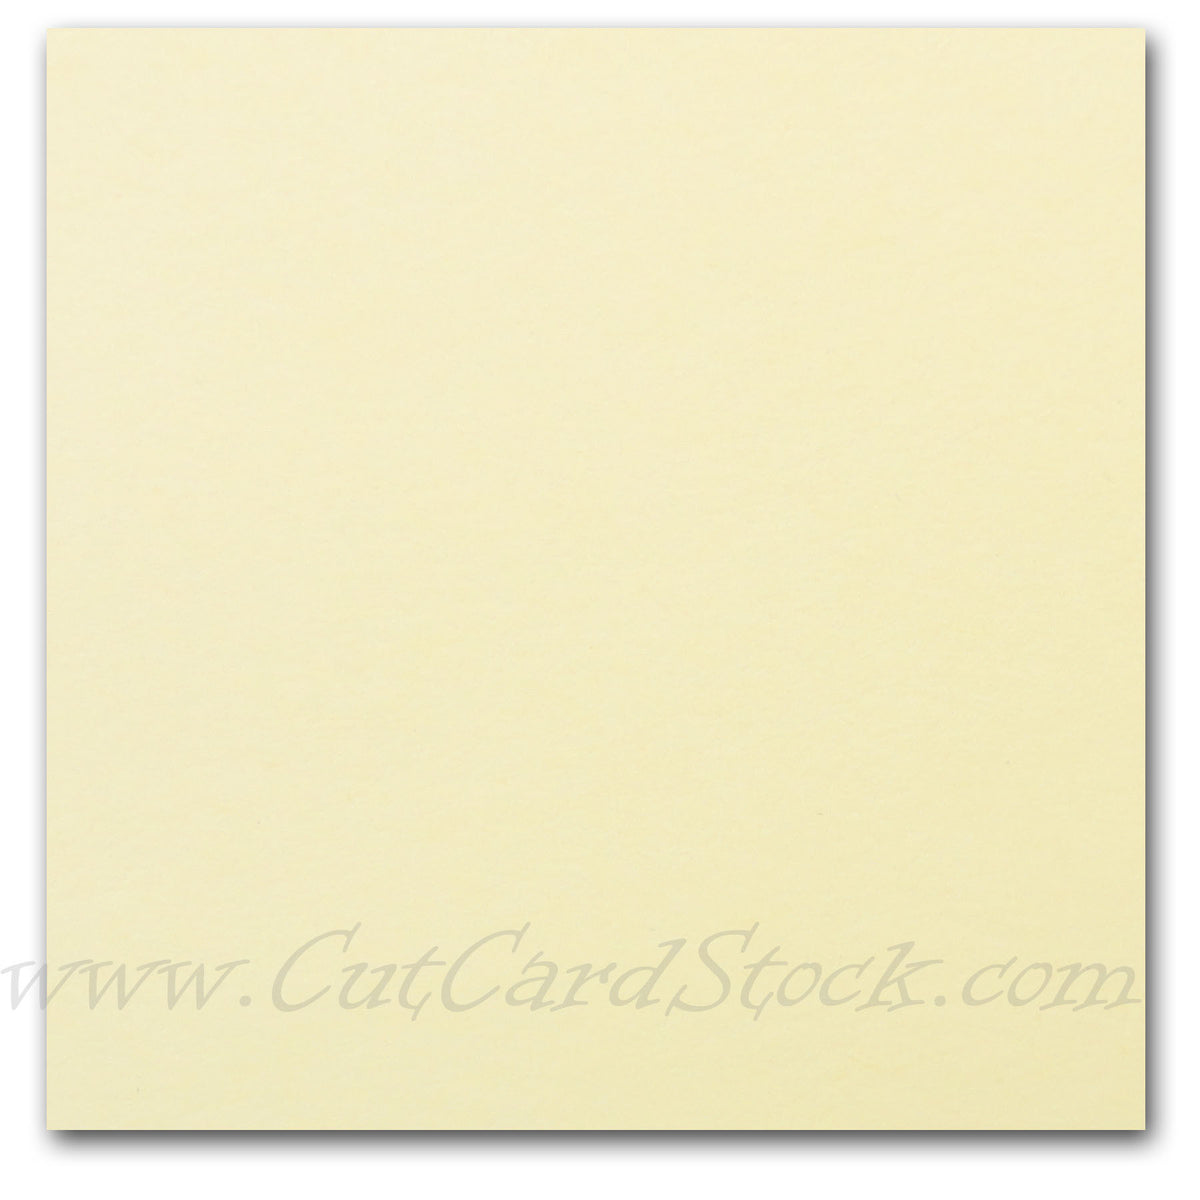 Ivory Discount Card Stock